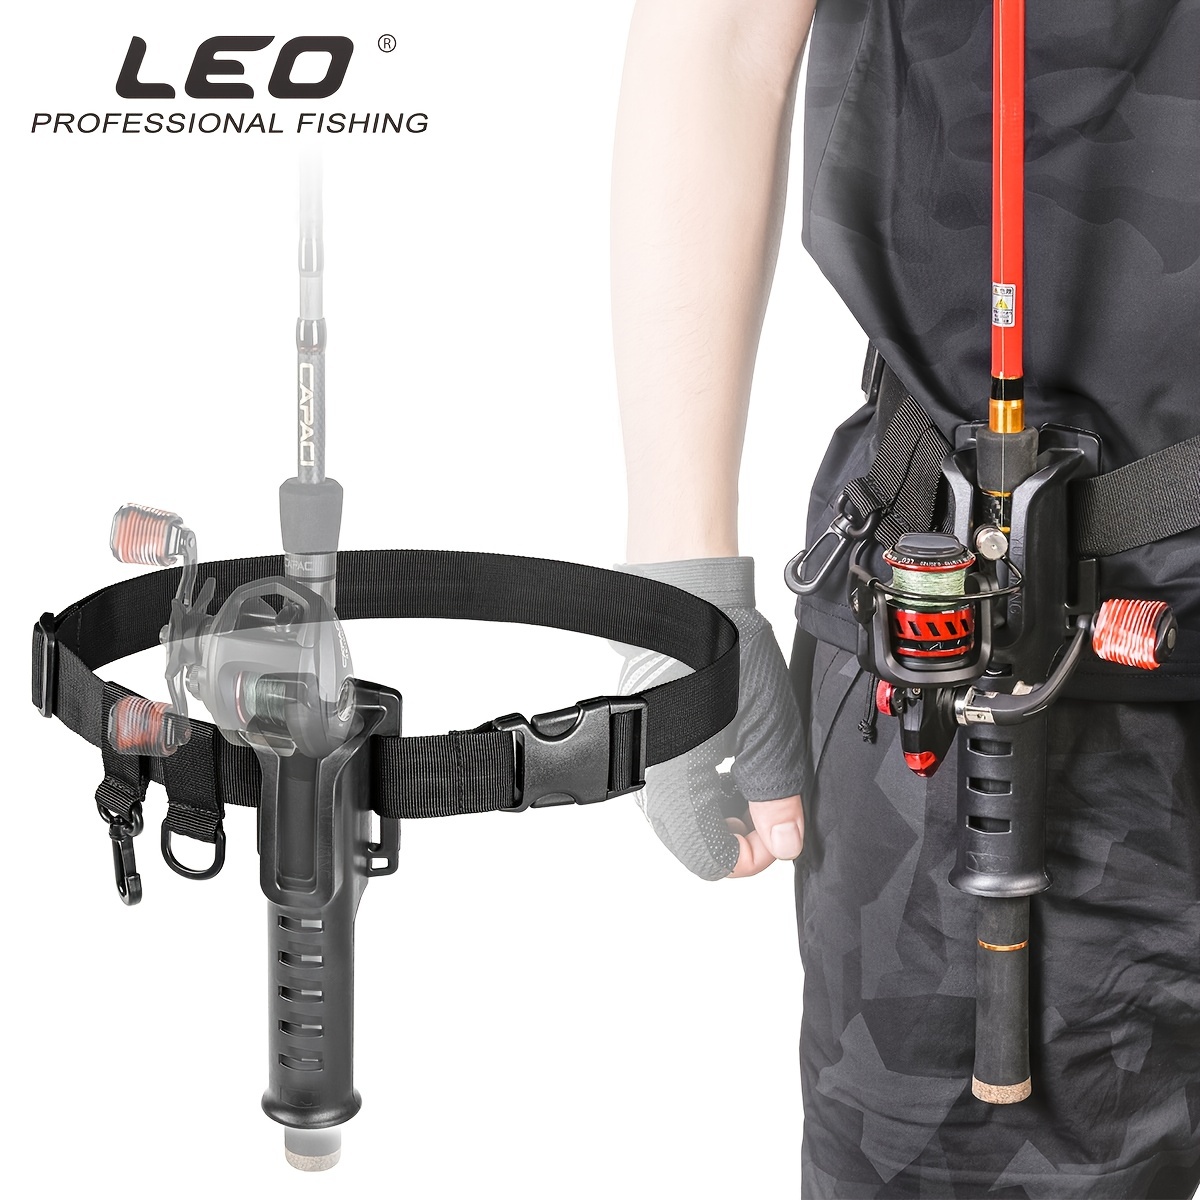 Comfortable Deep Sea Fishing Waist Support With Iron Rod Holder And Tackle  Belt, High-quality & Affordable